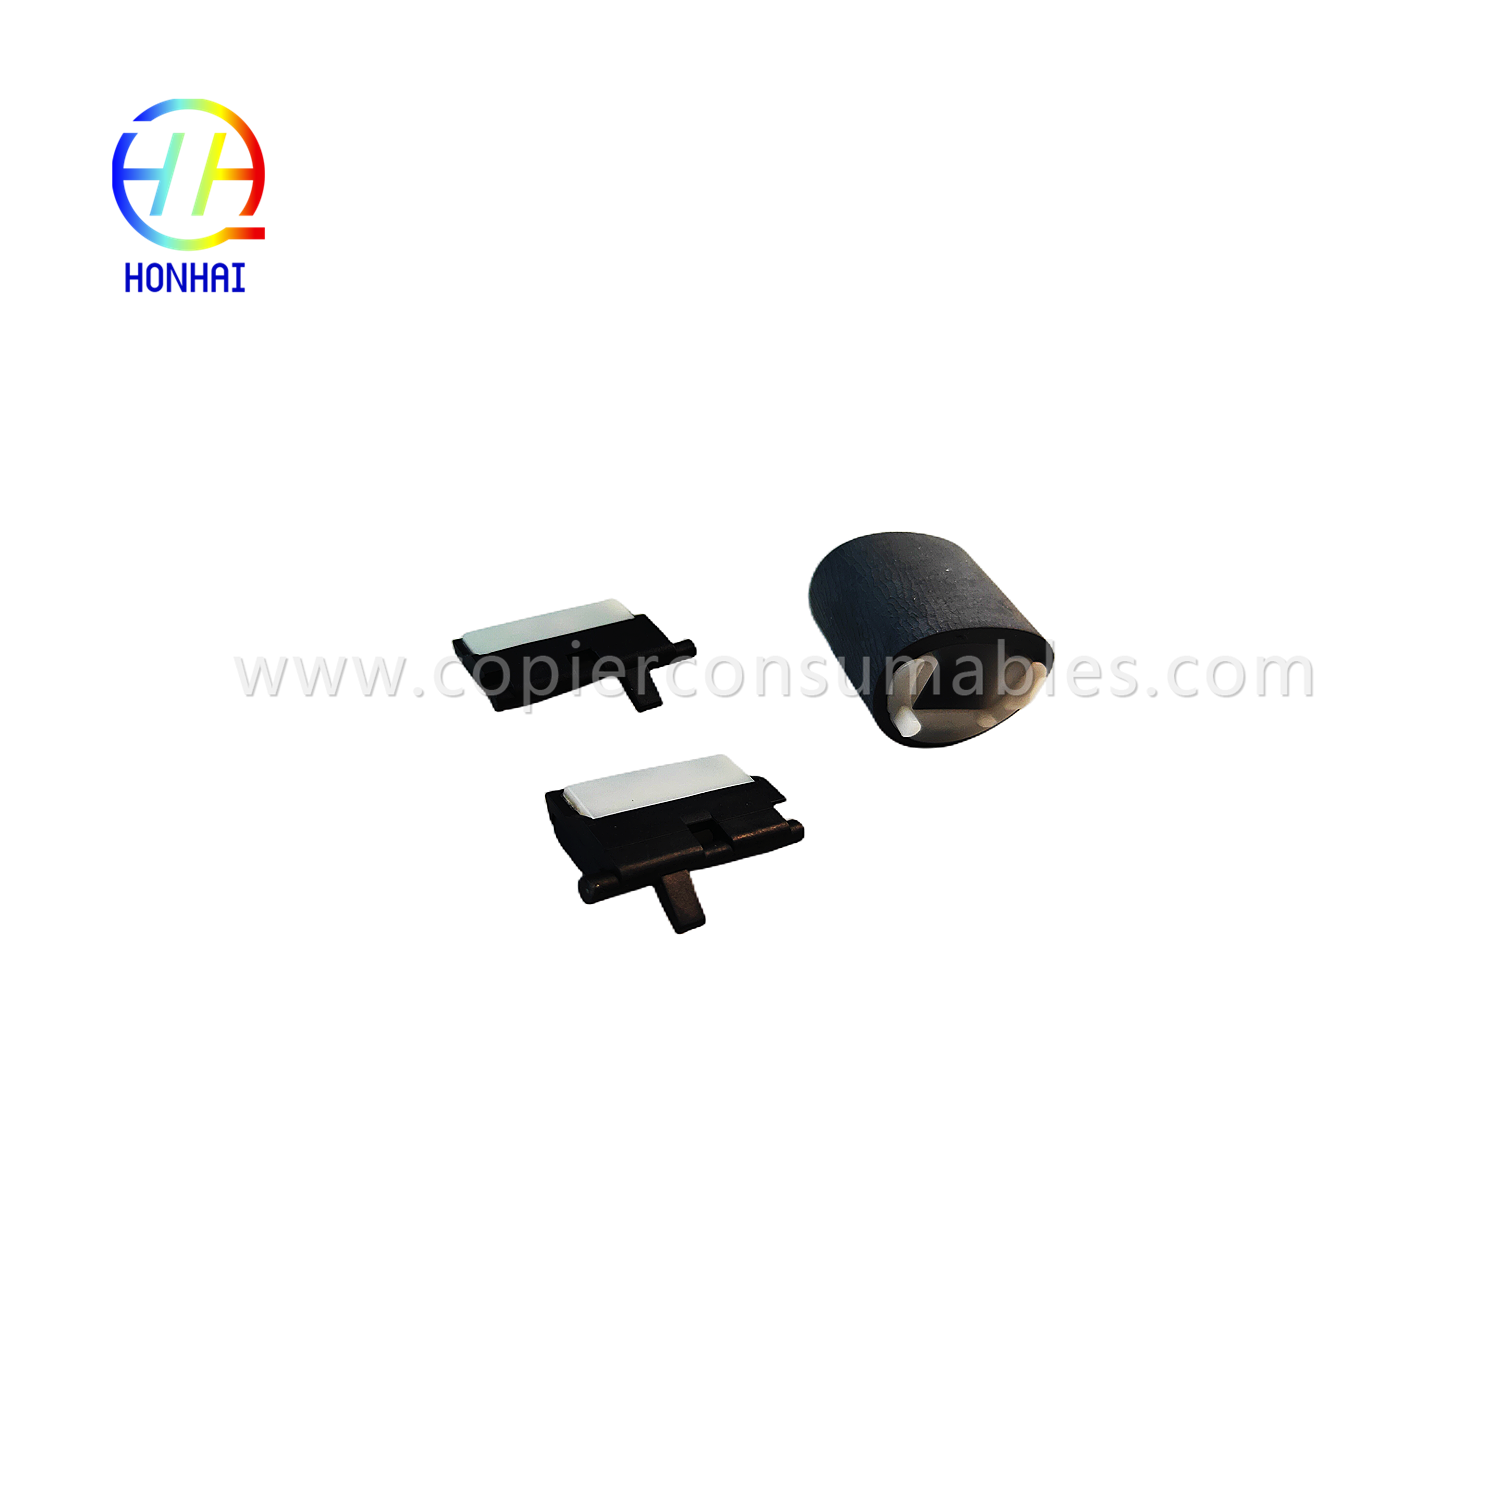 https://www.copierconsumables.com/paper-pickup-roller-separates-pad%ef%bc%88set%ef%bc%89for-hp-pagewide-x585z-x451dn-x476dn-x551dw-x576dw-556dn-586- 452dn-477dn-552-577z-cb780-60012-produkto/